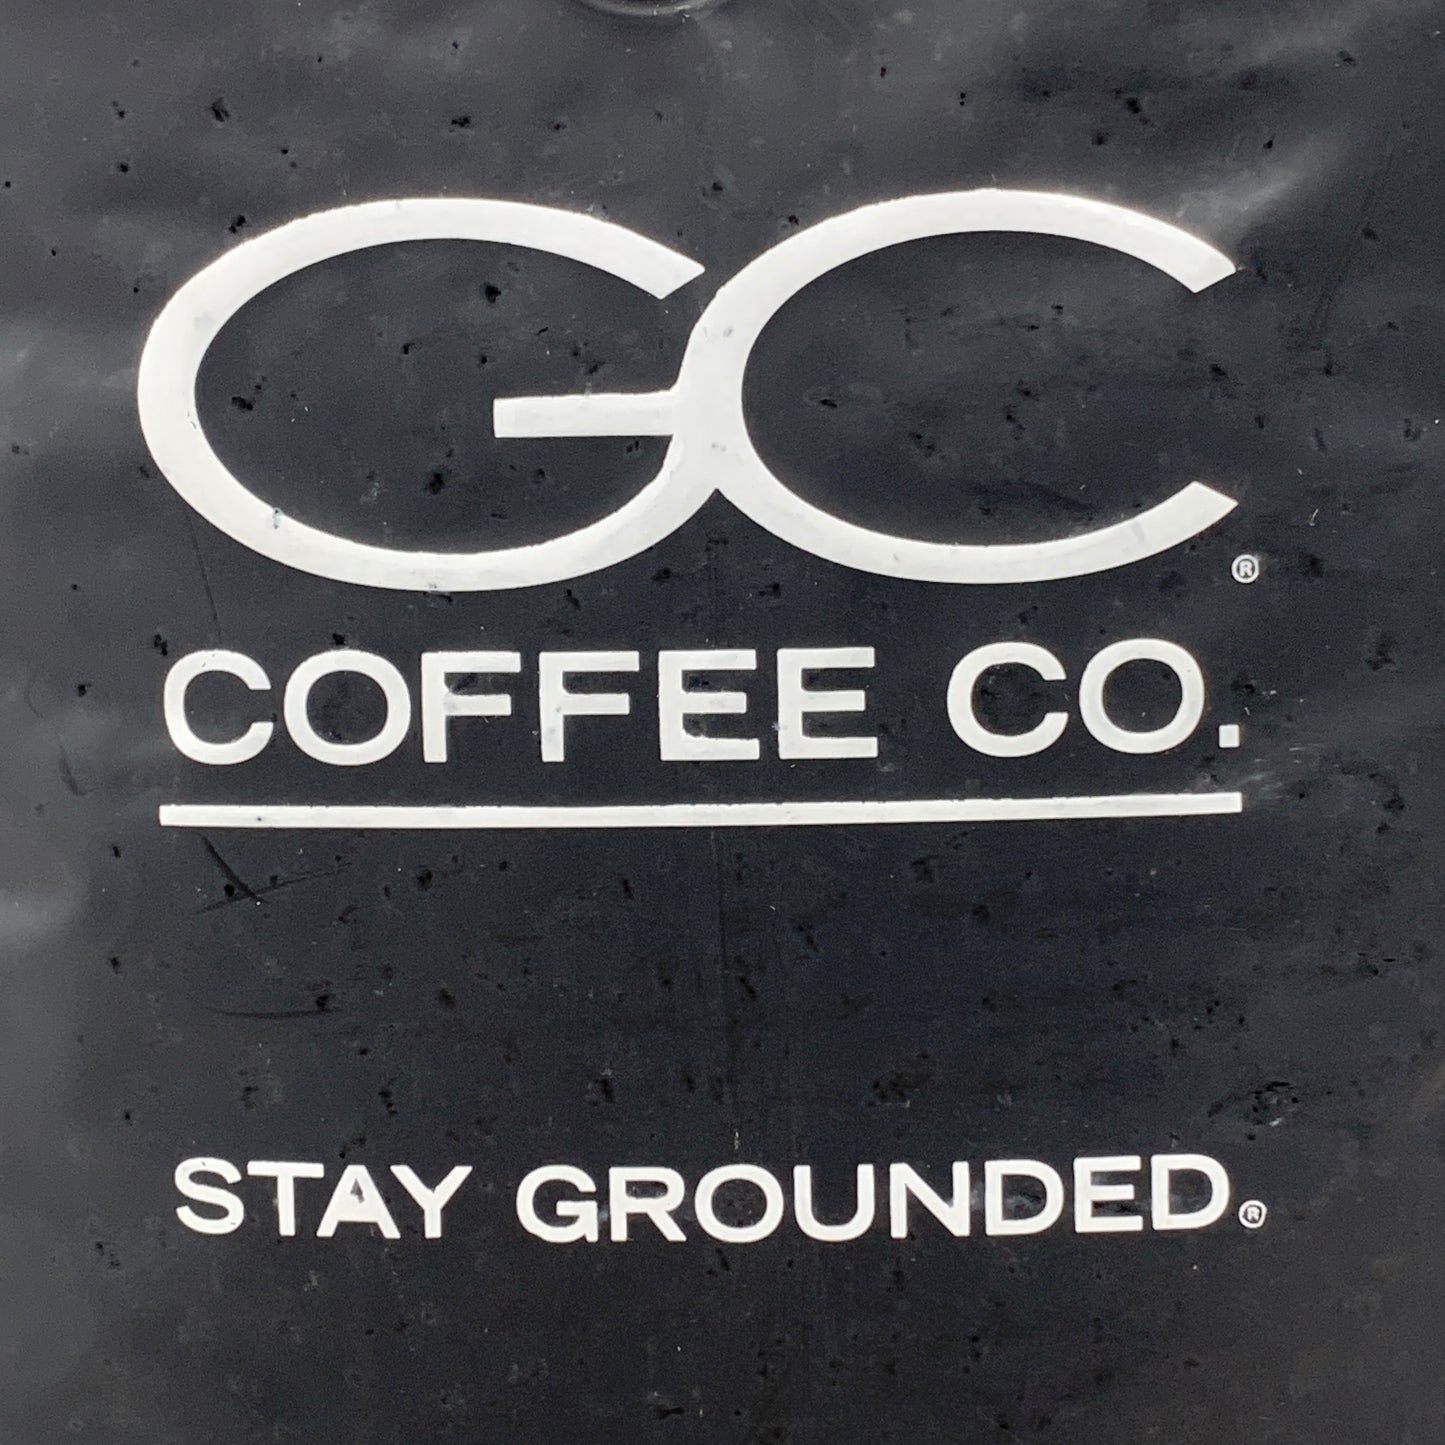 GC COFFEE CO. Stay Grounded Signature Blend Coffee Whole Beans 5 Pound Bag